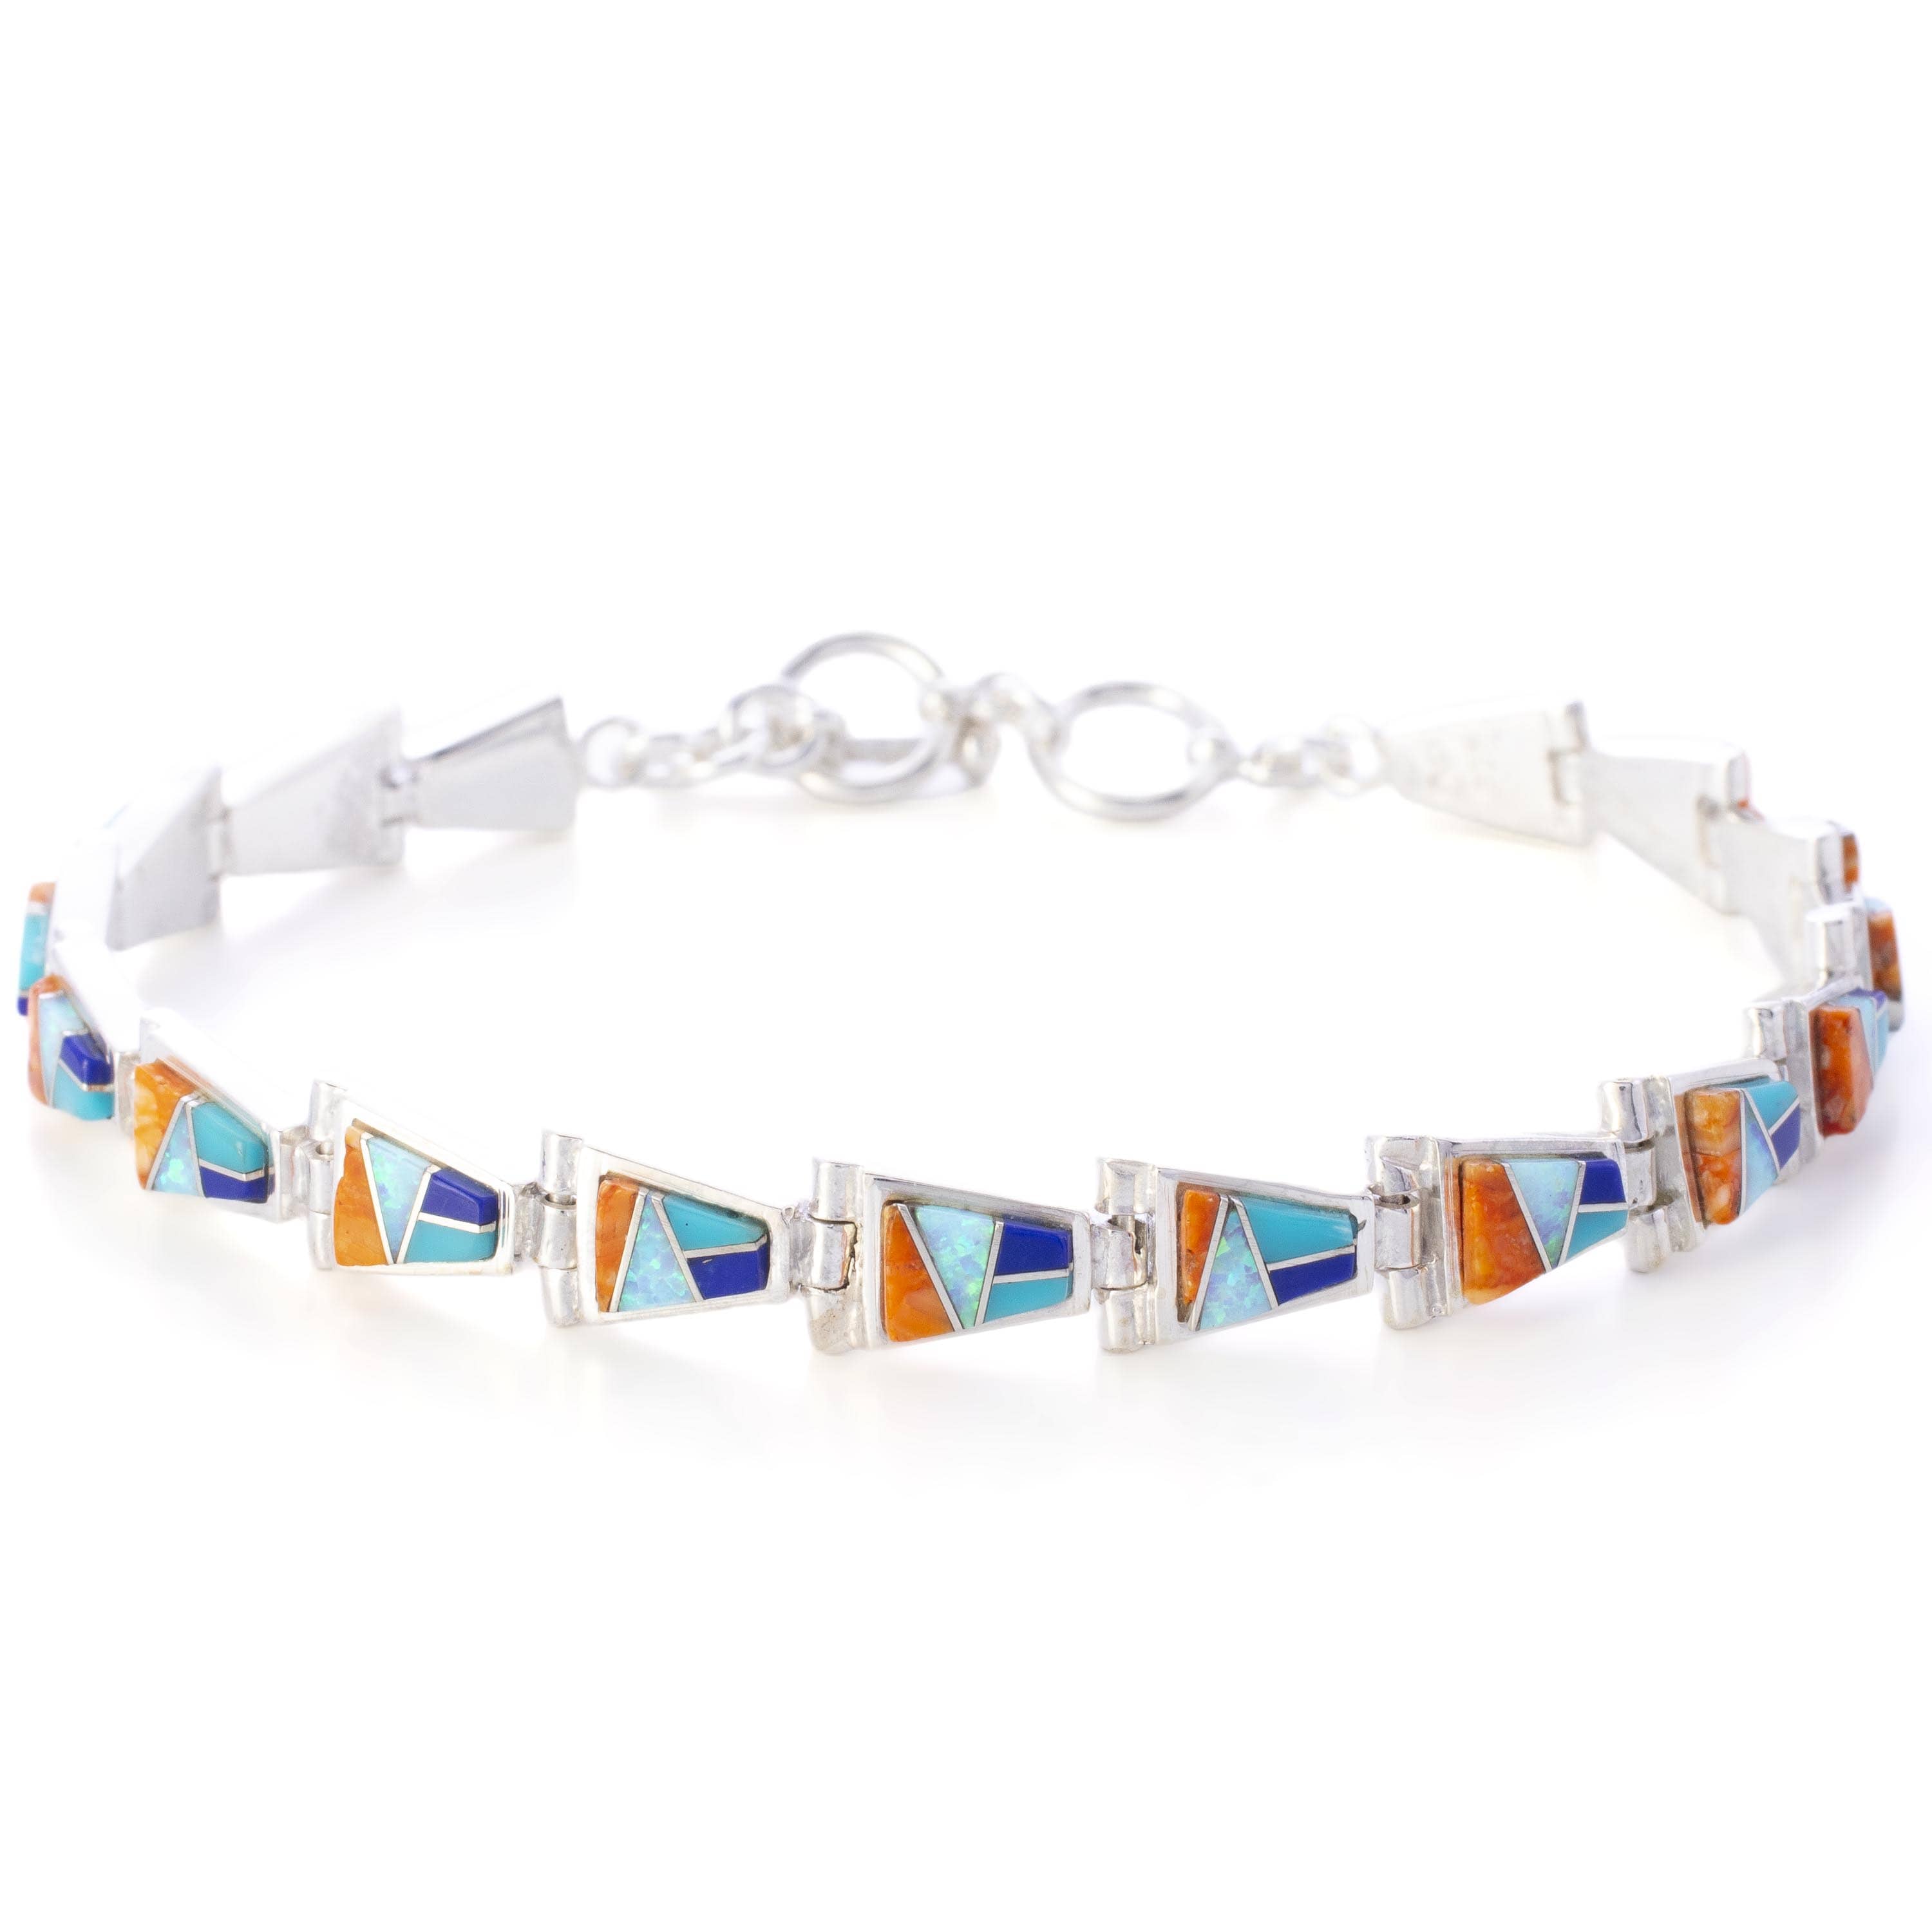 Kalifano Southwest Silver Jewelry Multi Gemstone 925 Sterling Silver Bracelet USA Handmade with Opal Accent NMB.0543.MT